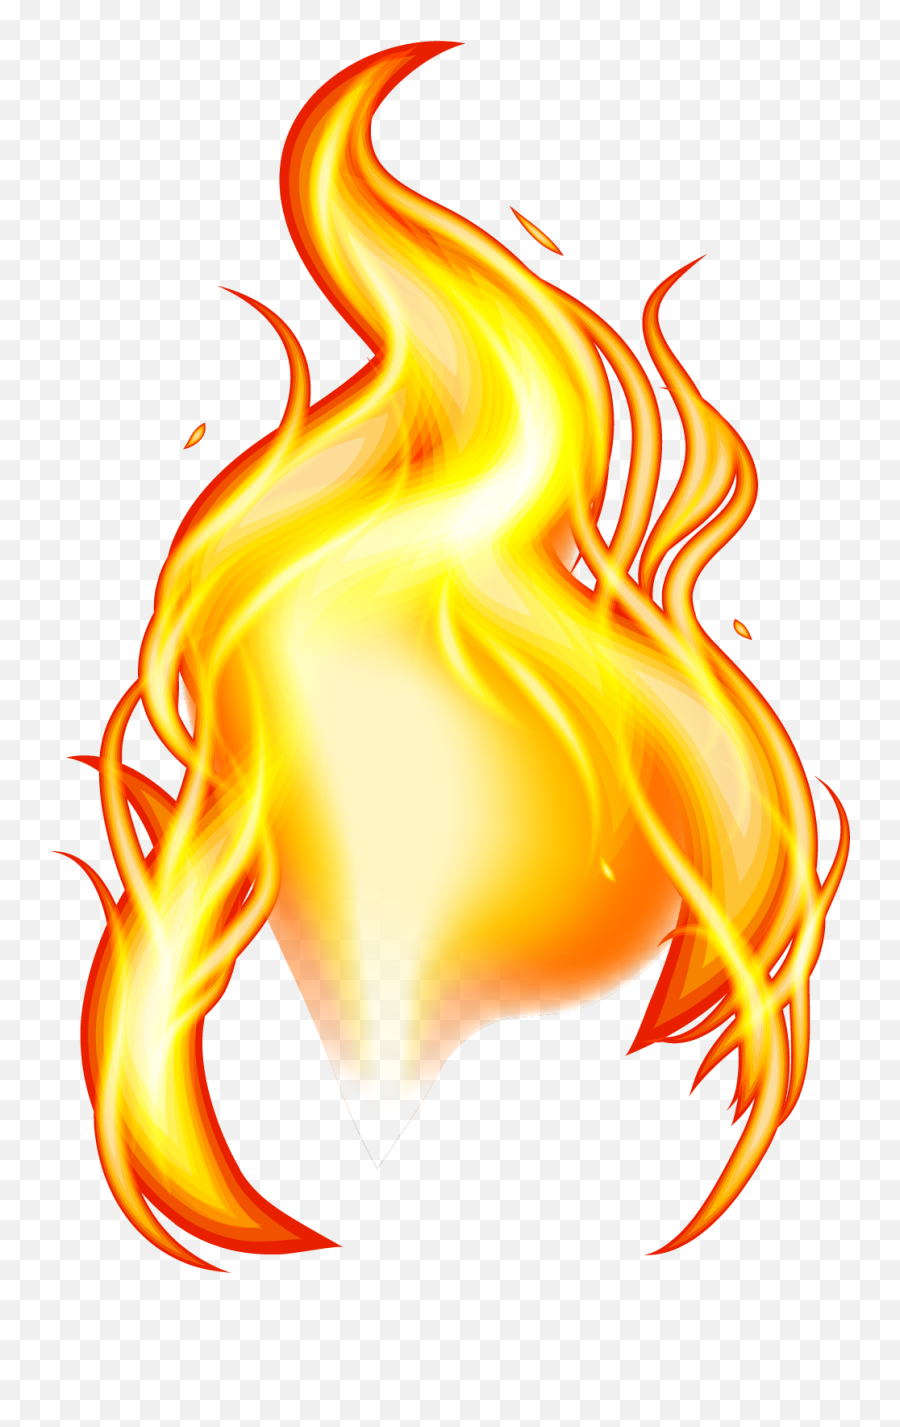 Download 15 Fire Cartoon Png For Free - Real Fire Effect Png,Cartoon Fire Png